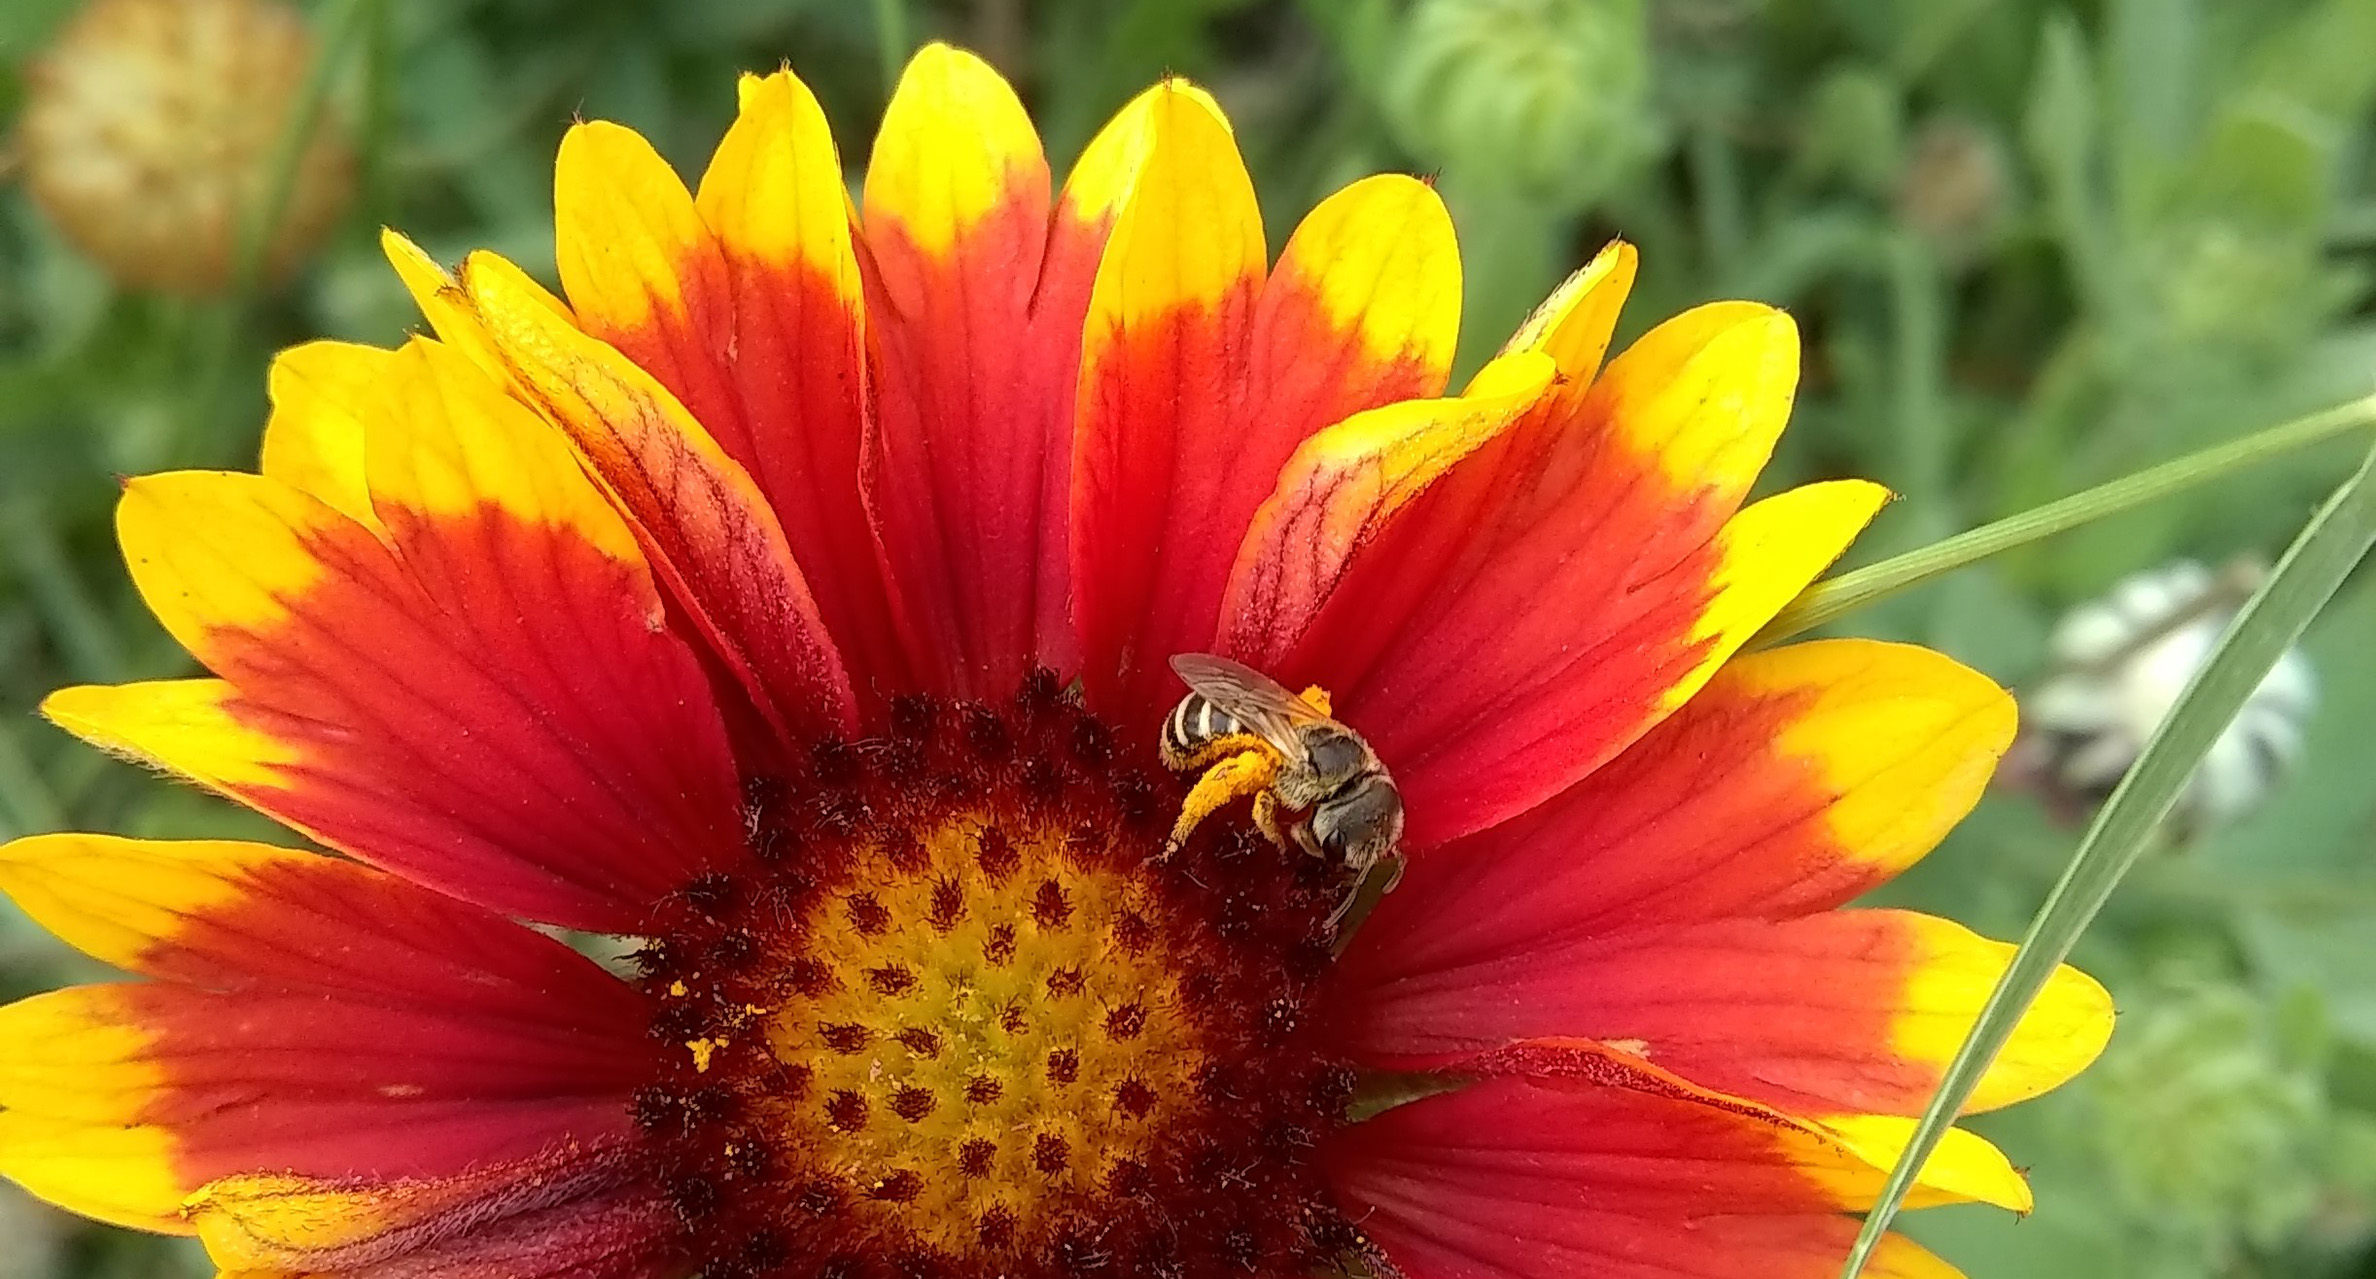 A small brown and white striped bee gather yellow pollen from the center of a red flower